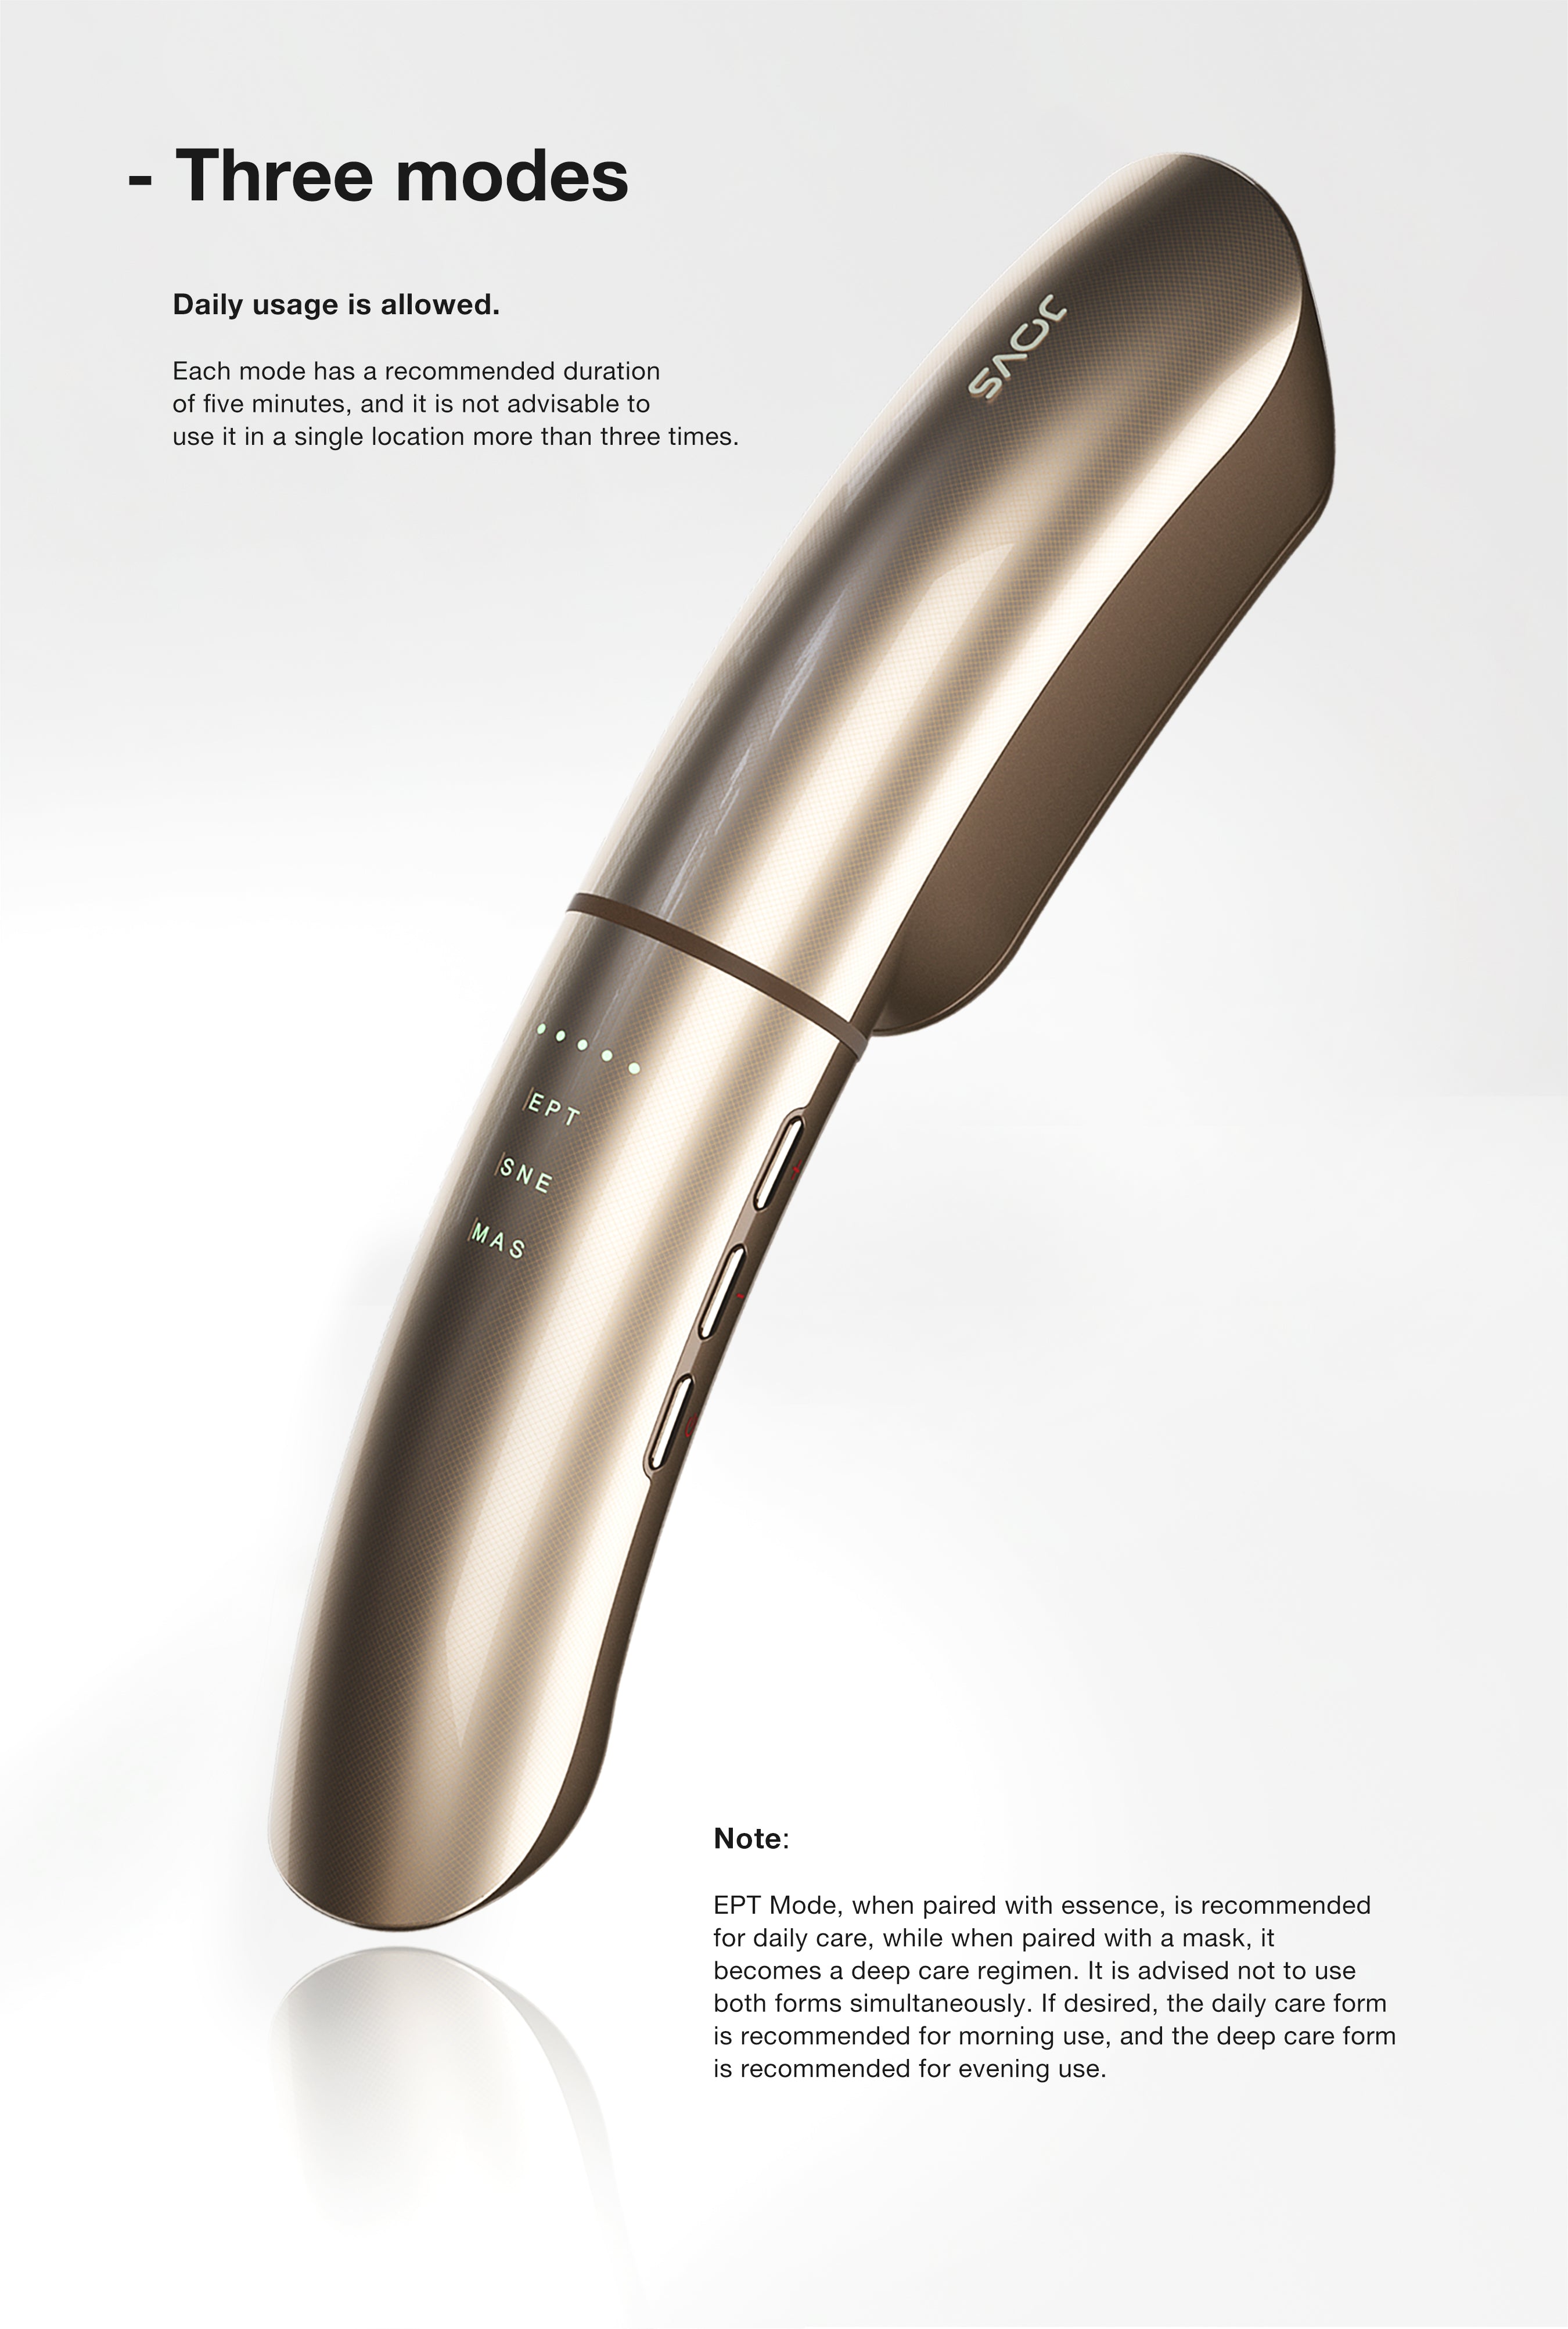 JOVS Slimax Microcurrent Anti-aging Deviceshowcasing three operational modes for daily skin care and rejuvenation.